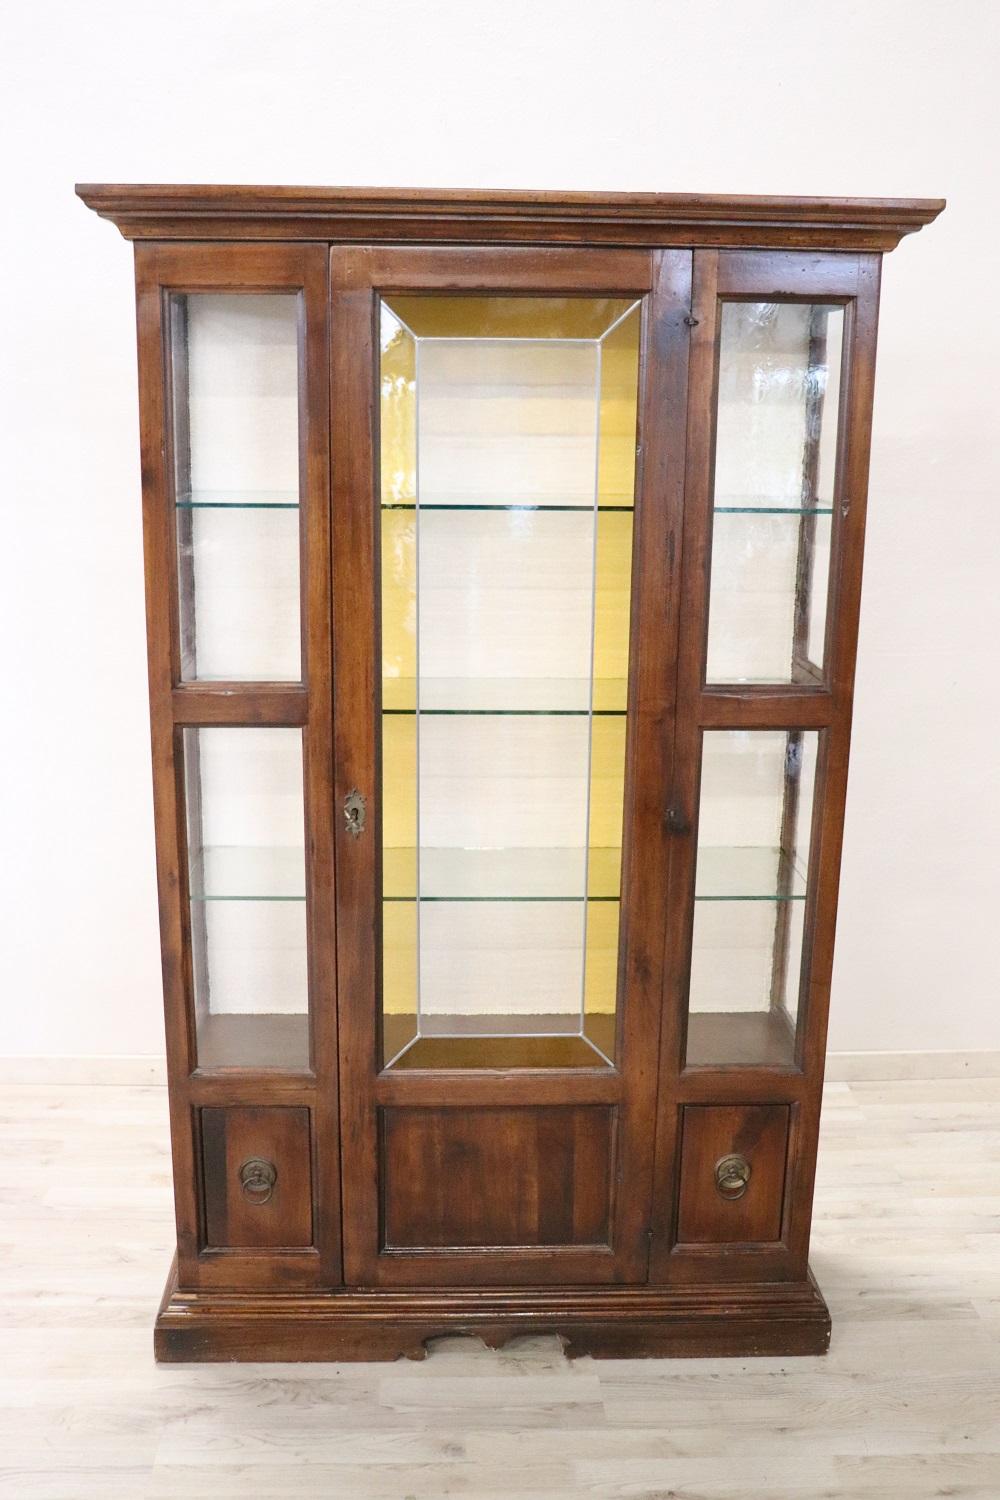 Italian luxury furniture 1950s in walnut wood. Very linear and essential perfect to be combined even in a modern home. Precious antique cathedral glass with yellow decoration. The upper part with glass doors is perfect for displaying your collection